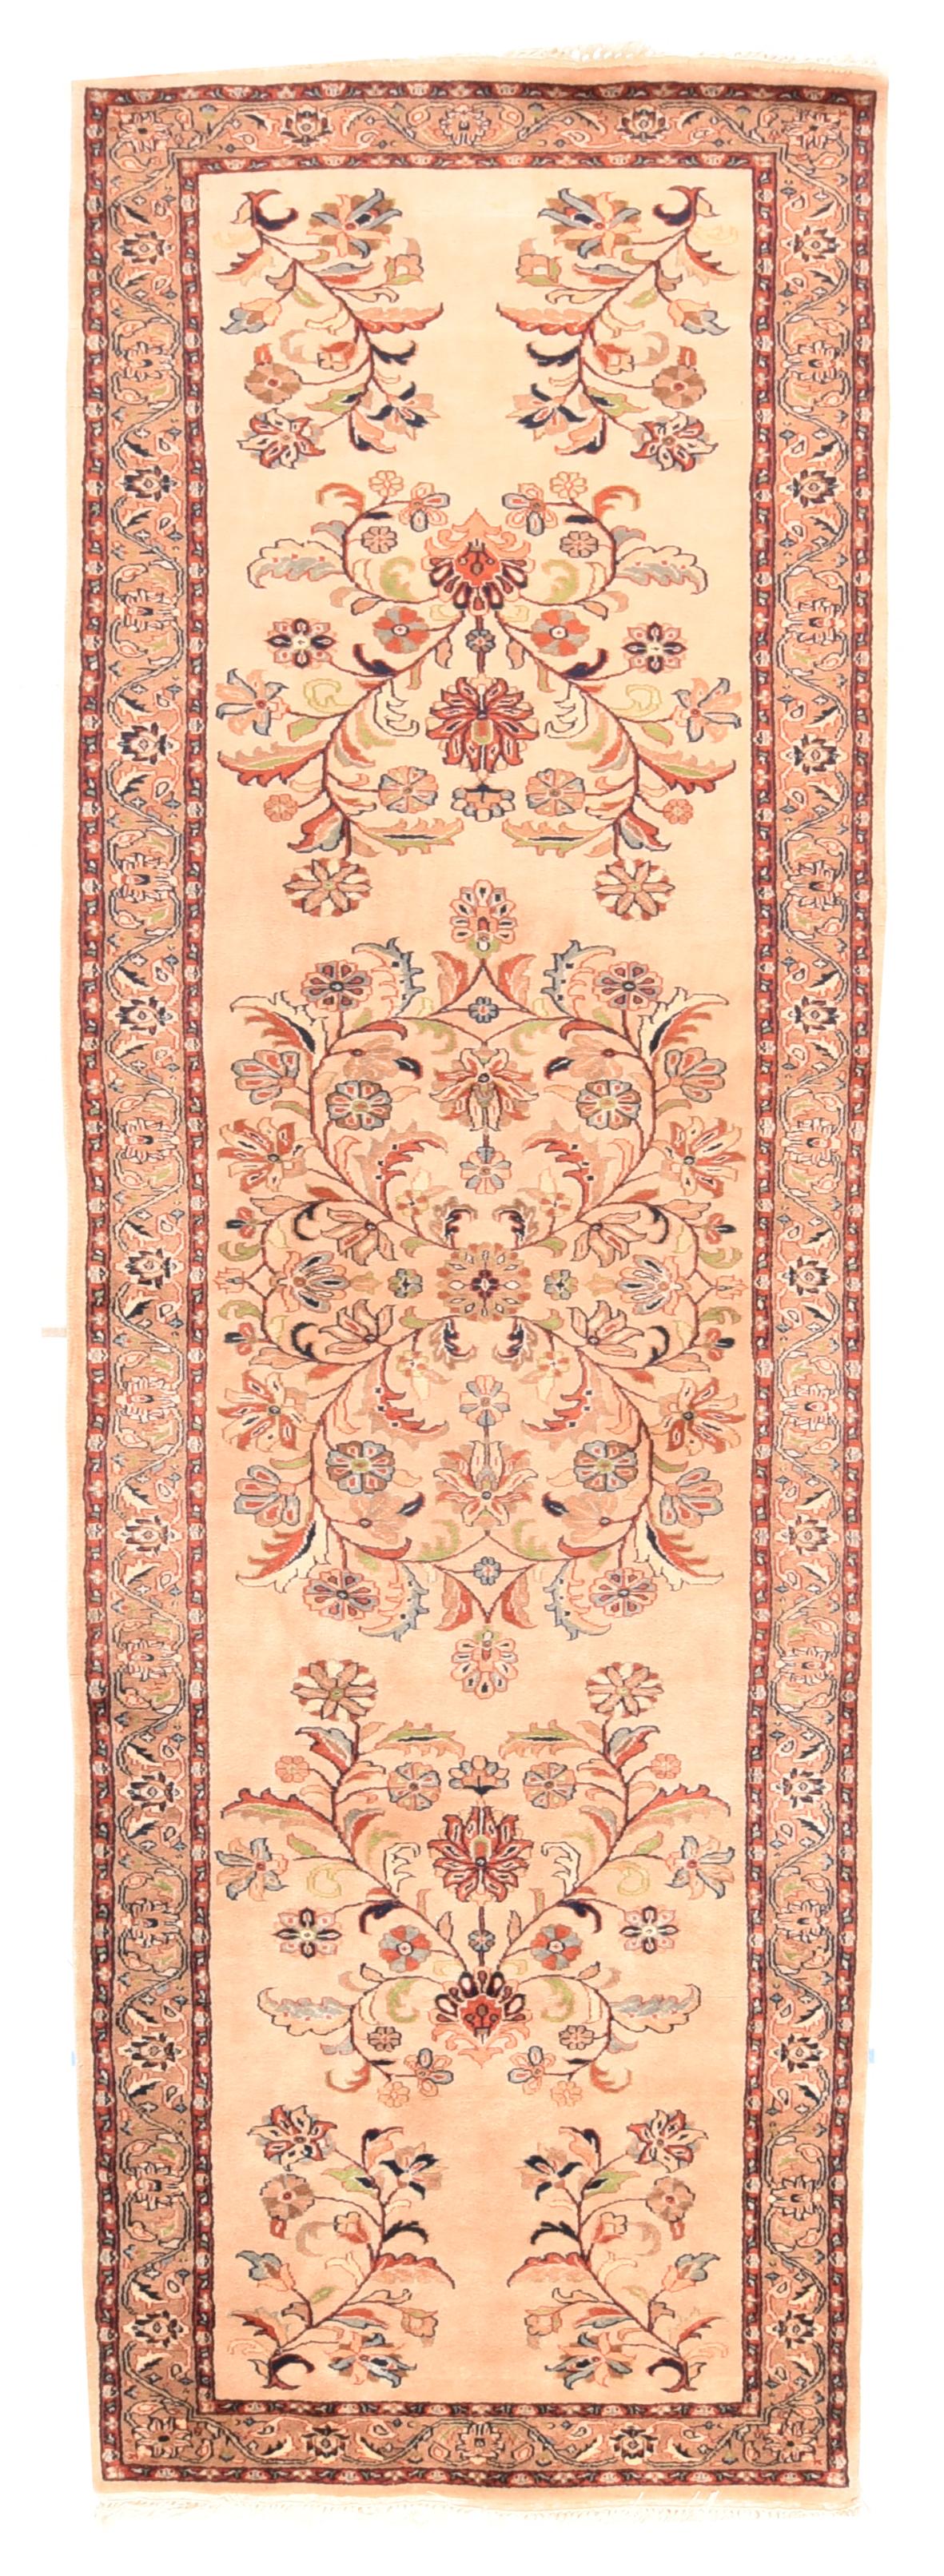 Indian Tabriz Runner 3'2'' x 11'11''. The straw ecru field spaciously displays an open four curvy stem palmette, rosette and leaf medallion with branching palmettes above and below, and further, en suite single stem flowers in the corners. Straw,